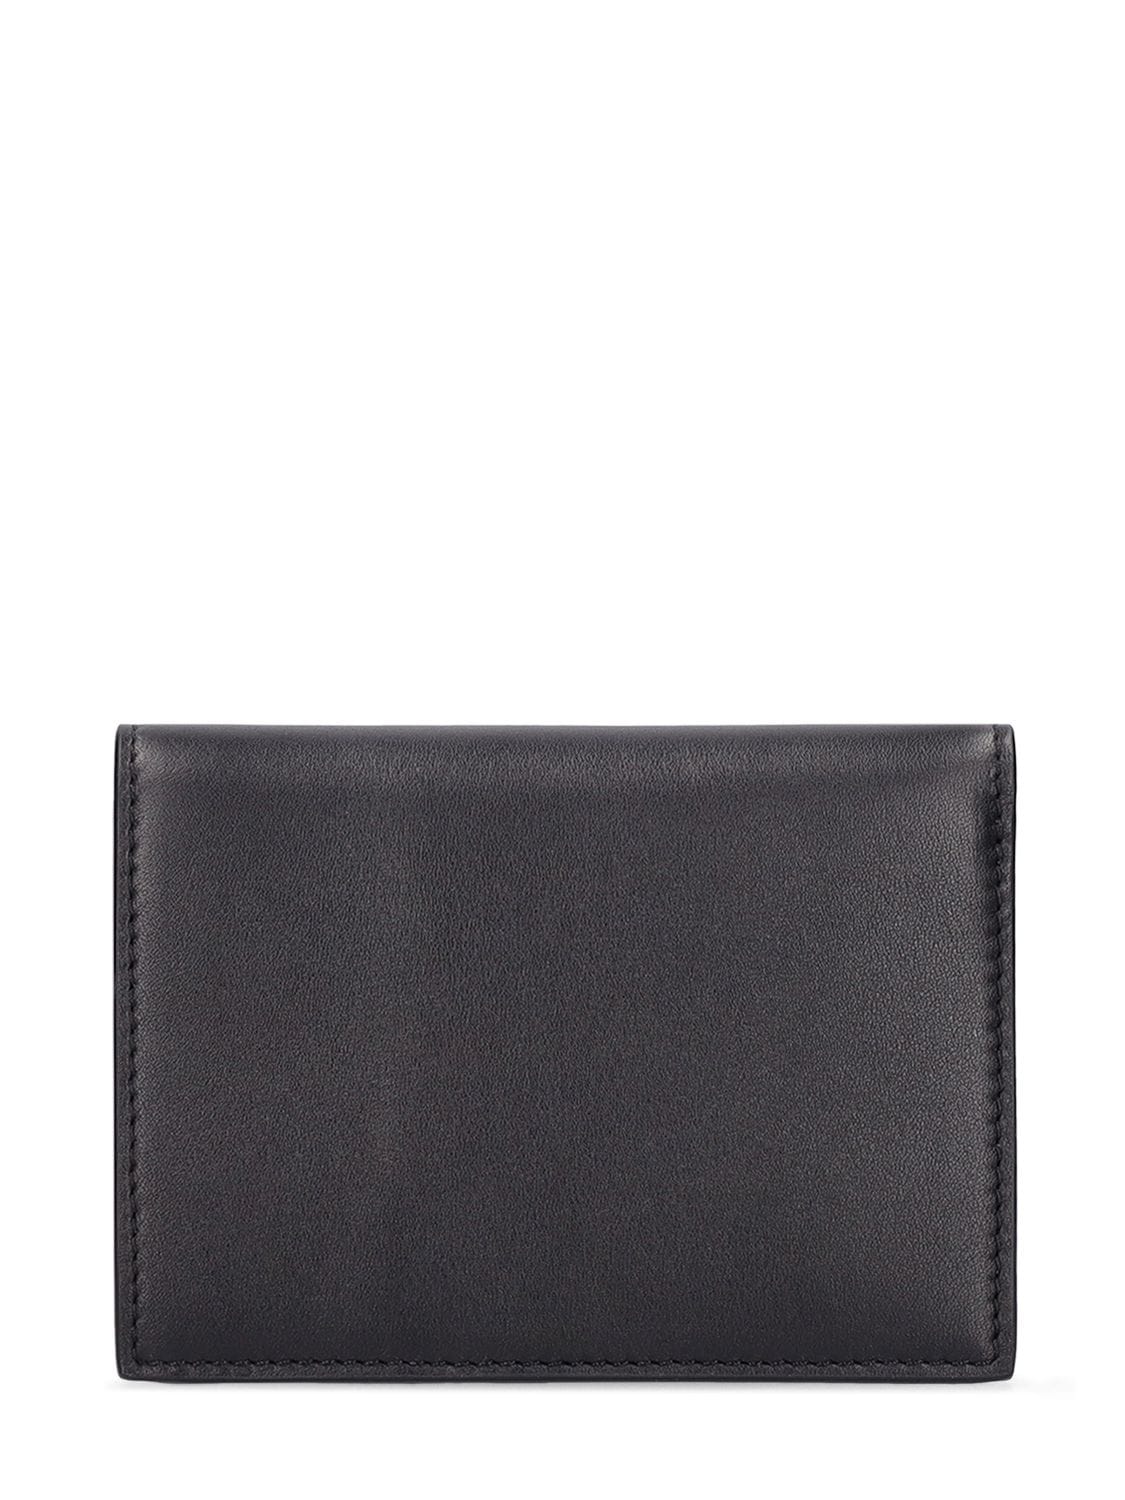 Shop Off-white "for Cards" Folded Leather Card Holder In Black,white